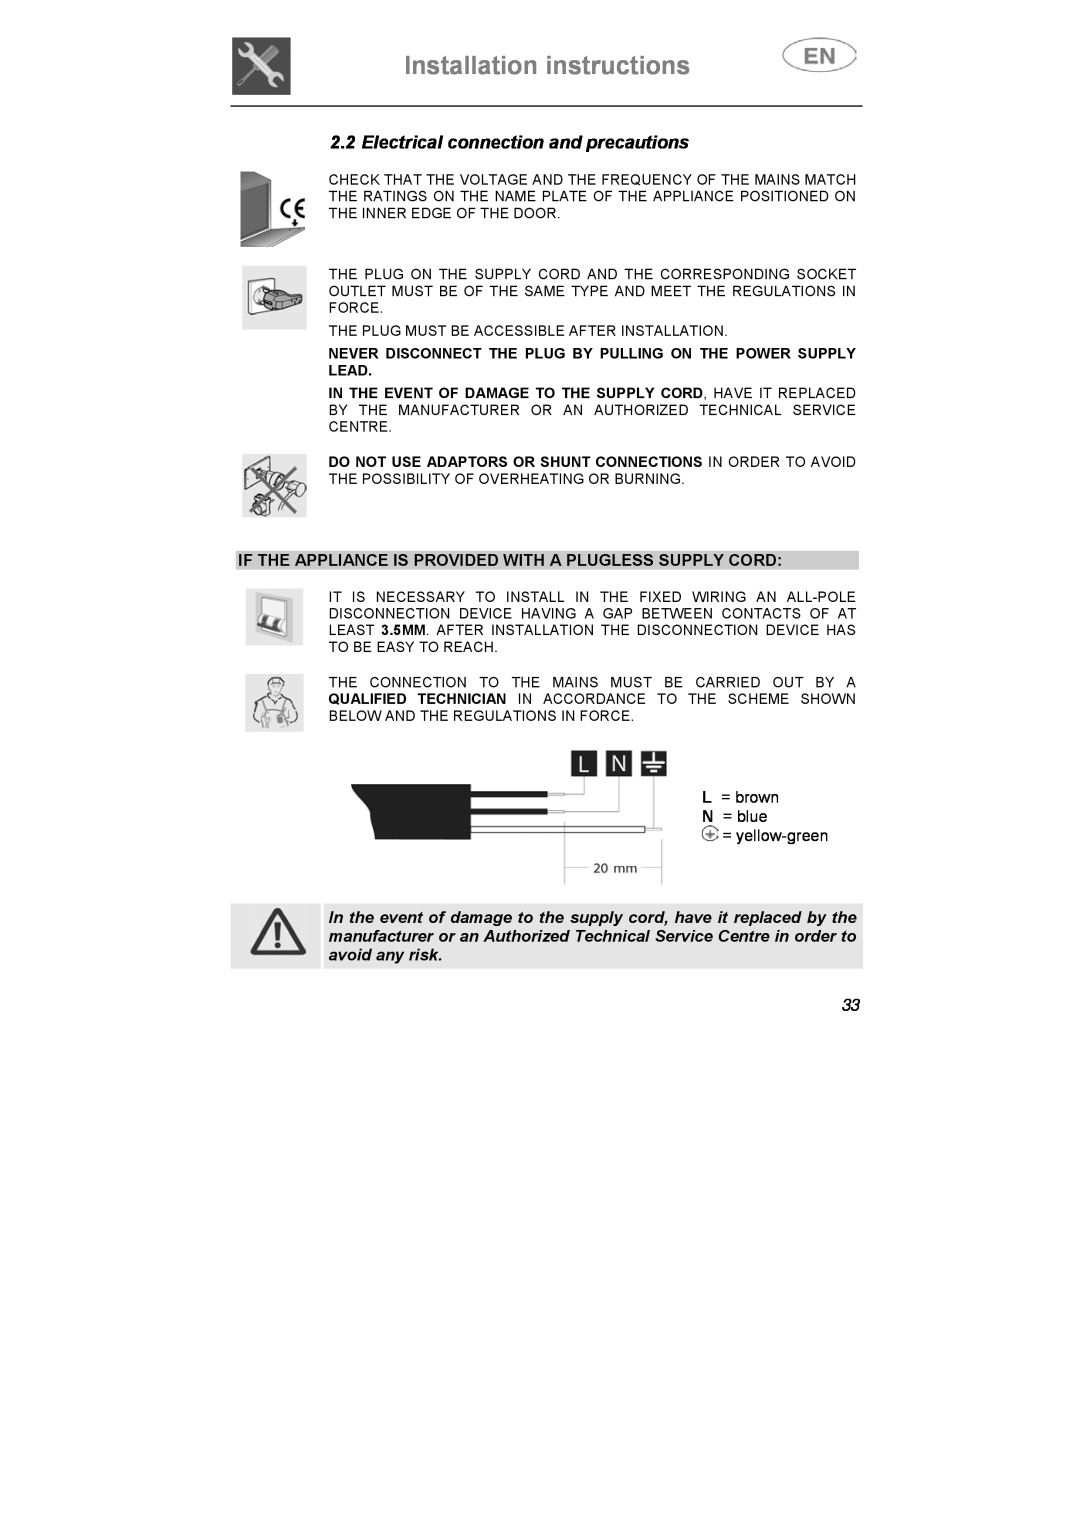 Smeg DI612CAH manual Installation instructions, Electrical connection and precautions 